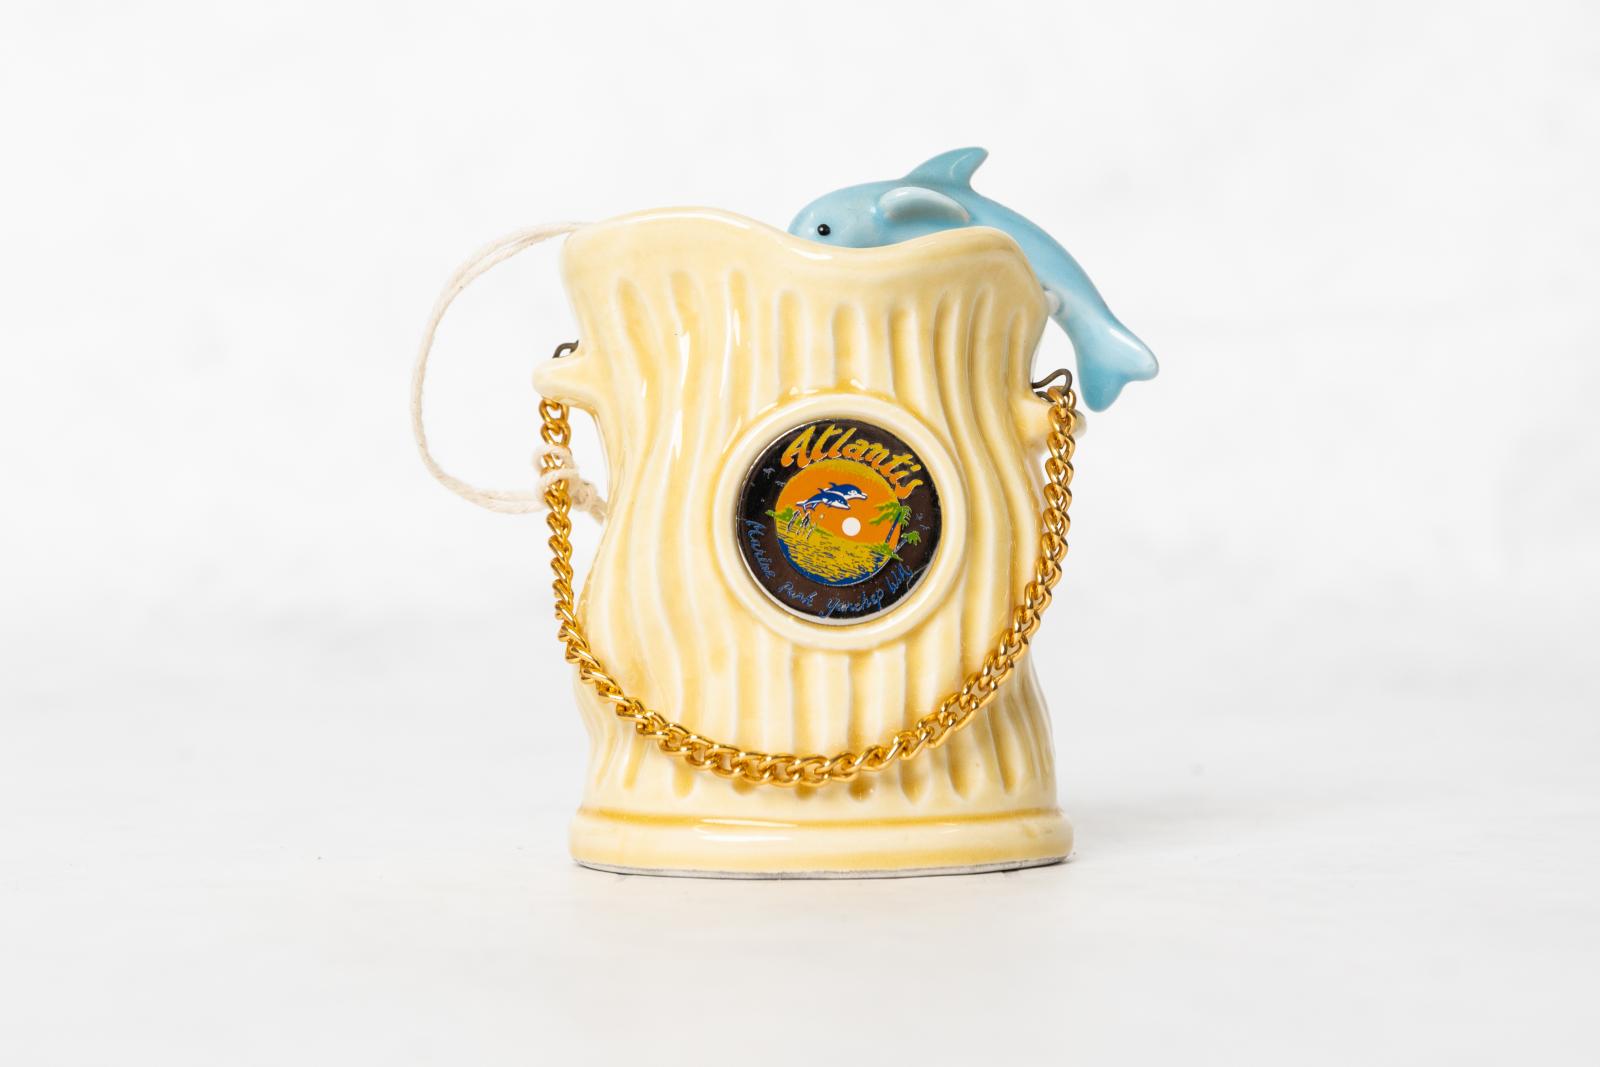 A cream coloured ceramic ornament with a fluted pattern. The item is open at the top and there is a blue ceramic dolphin resting on the right hand side lip facing the inside of the ornament. There are two small handles on either side, the left is higher than the right and connected just above these handles is a metal clip inserted into a hole. There is a gold chain connected to each metal clip which can be used as a handle. On the front side is a circular medallion with words 'Atlantis/Marine Park, Yanchep 